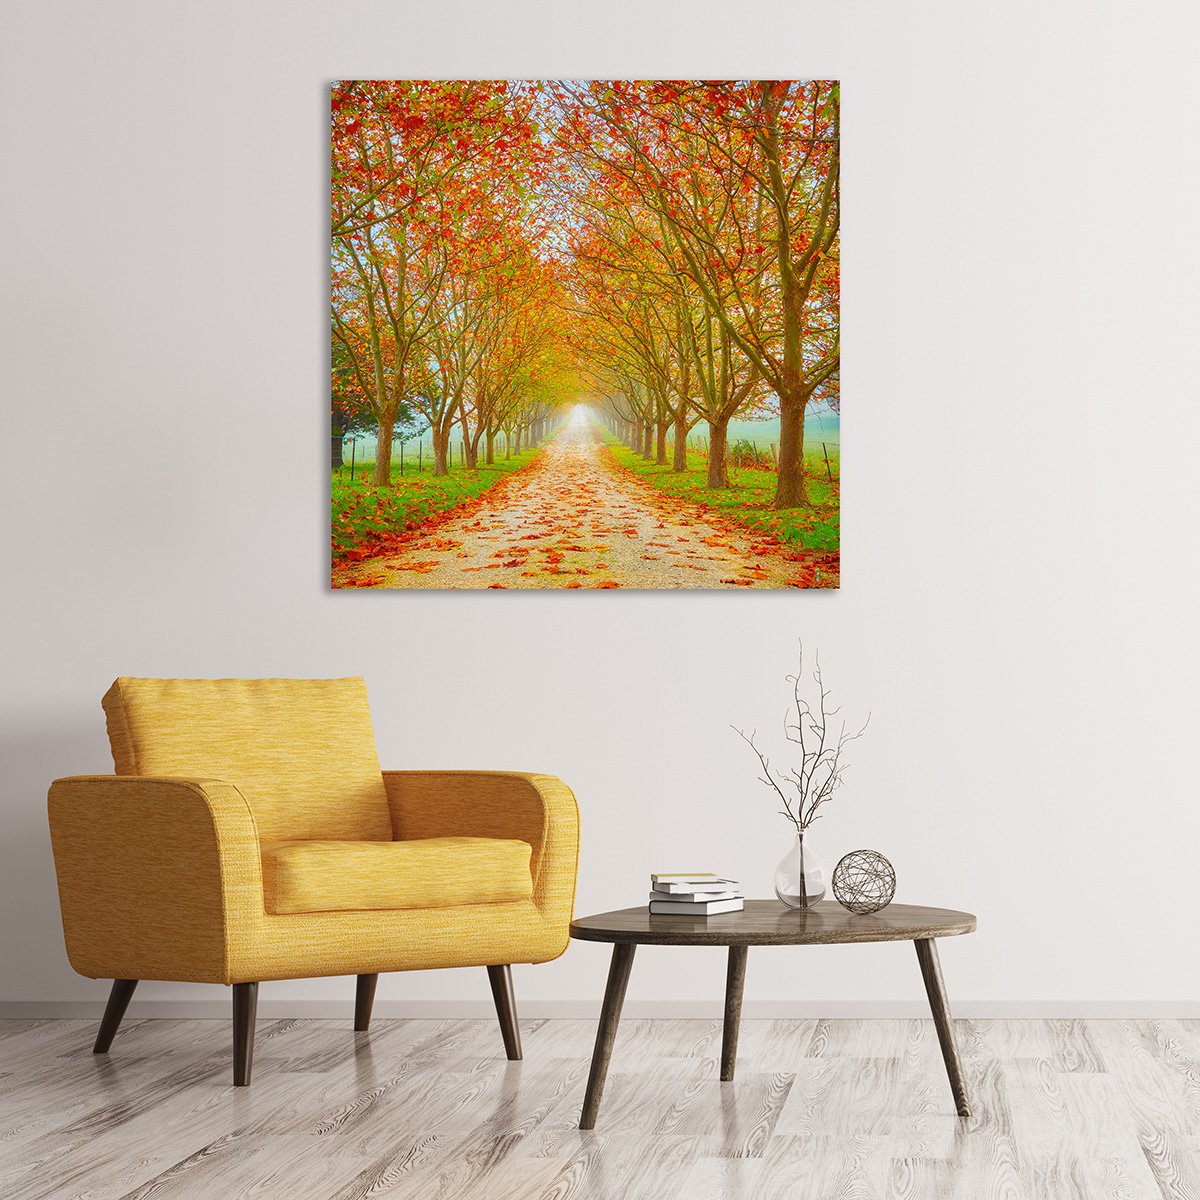 Welcome To Autumn, Wall Art, In room example